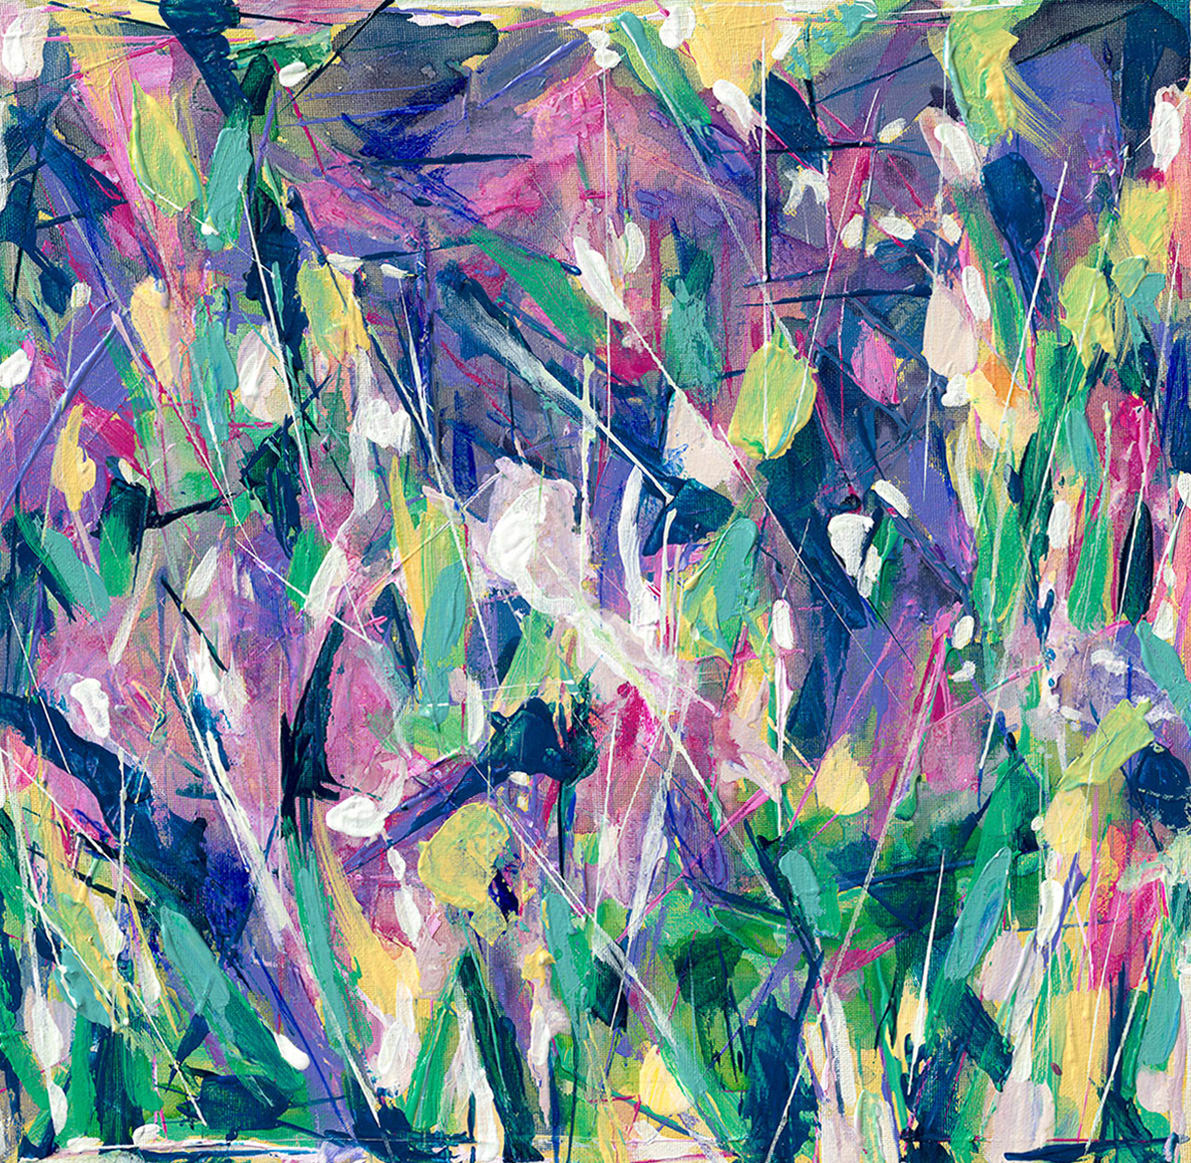 Green Purple Abstract Flowers, 2019, acrylic on canvas, 18 x 18 inches by Rachael Grad  Image: Green Purple Abstract Flowers, 2019, acrylic on canvas, 18 x 18 inches